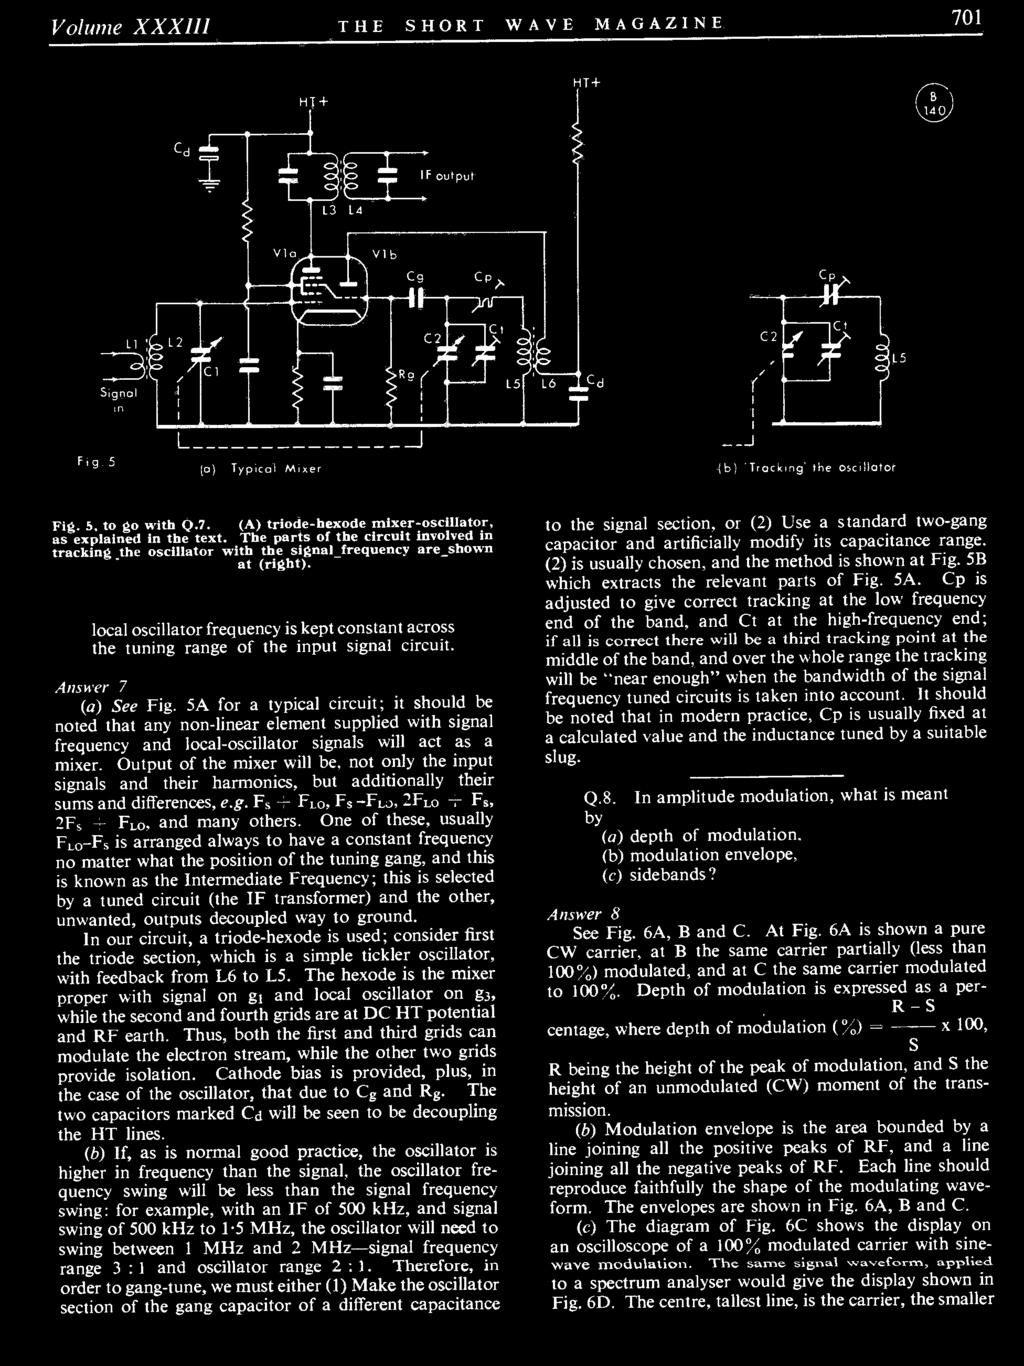 Volume XXXIII THE SHRT WAVE MAGAZINE 701 HTt J 140 C C2 L5 Fig 5 L (a) Typical Mixer J (b) 'Tracking' the oscillator Fig. 5, to go with Q.7. (A) triode-hexode mixer -oscillator, as explained in the text.